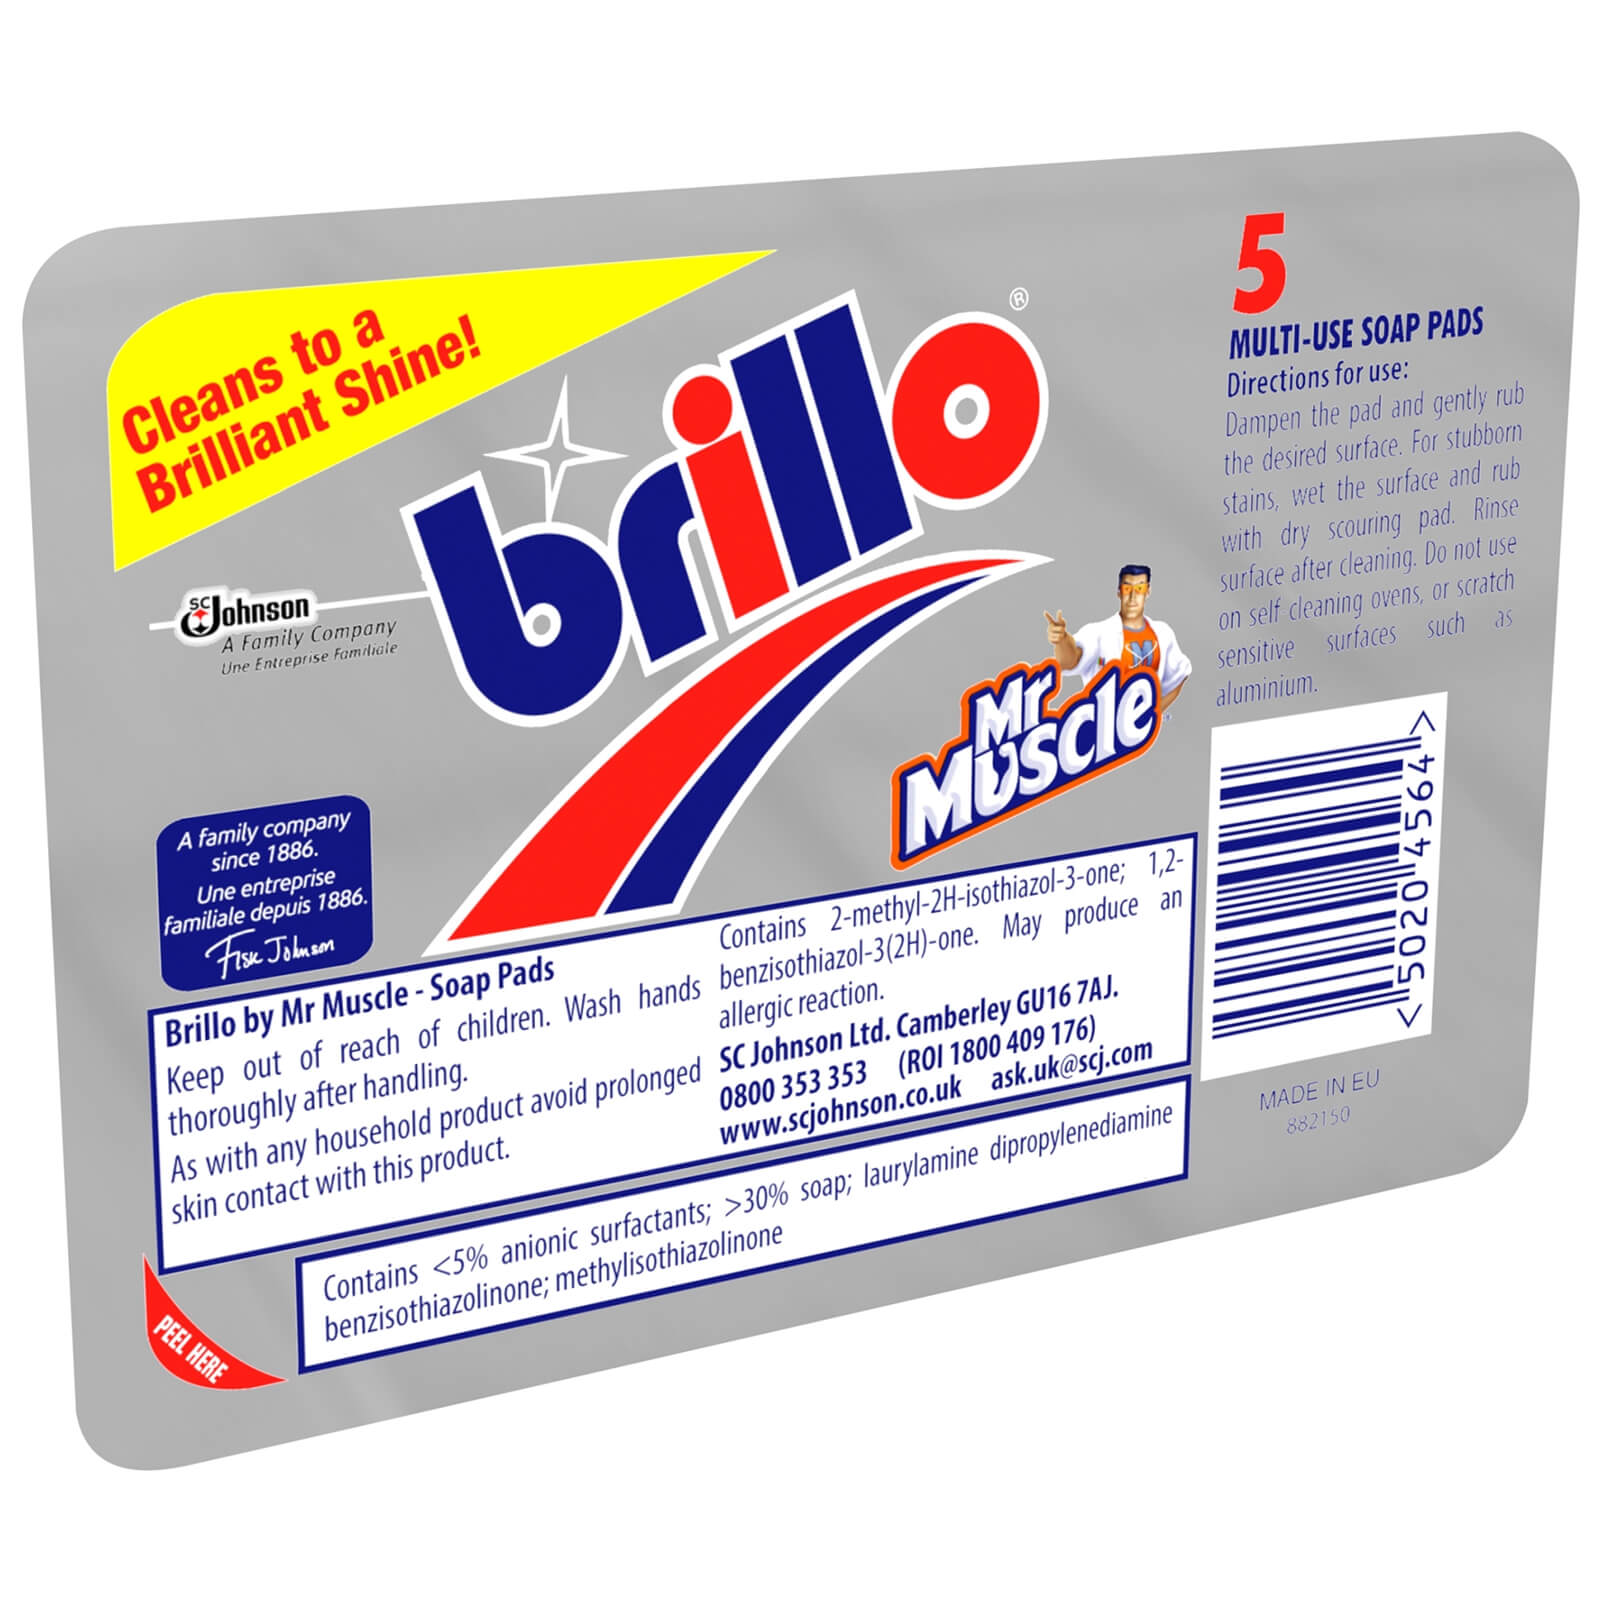 Photo of Brillo Pads - 5 Pack